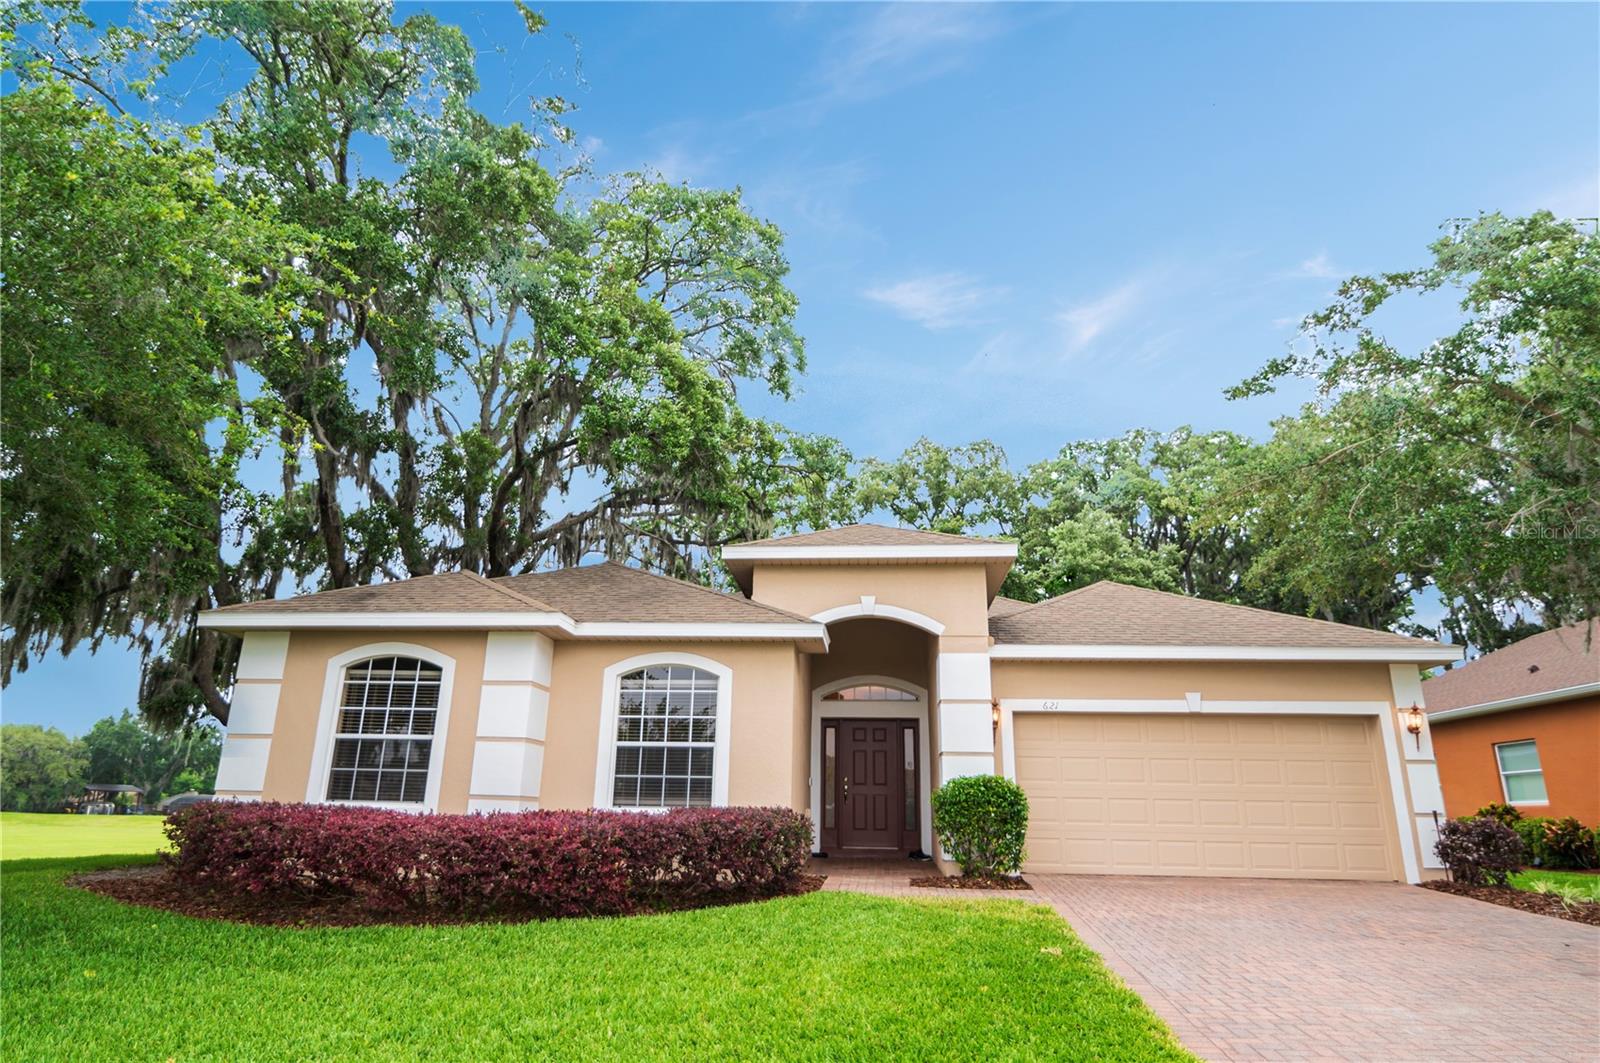 621 MEADOW GLADE DRIVE, 4 Bedrooms Bedrooms, ,2 BathroomsBathrooms,Residential,For Sale,MEADOW GLADE,MFRO6194502